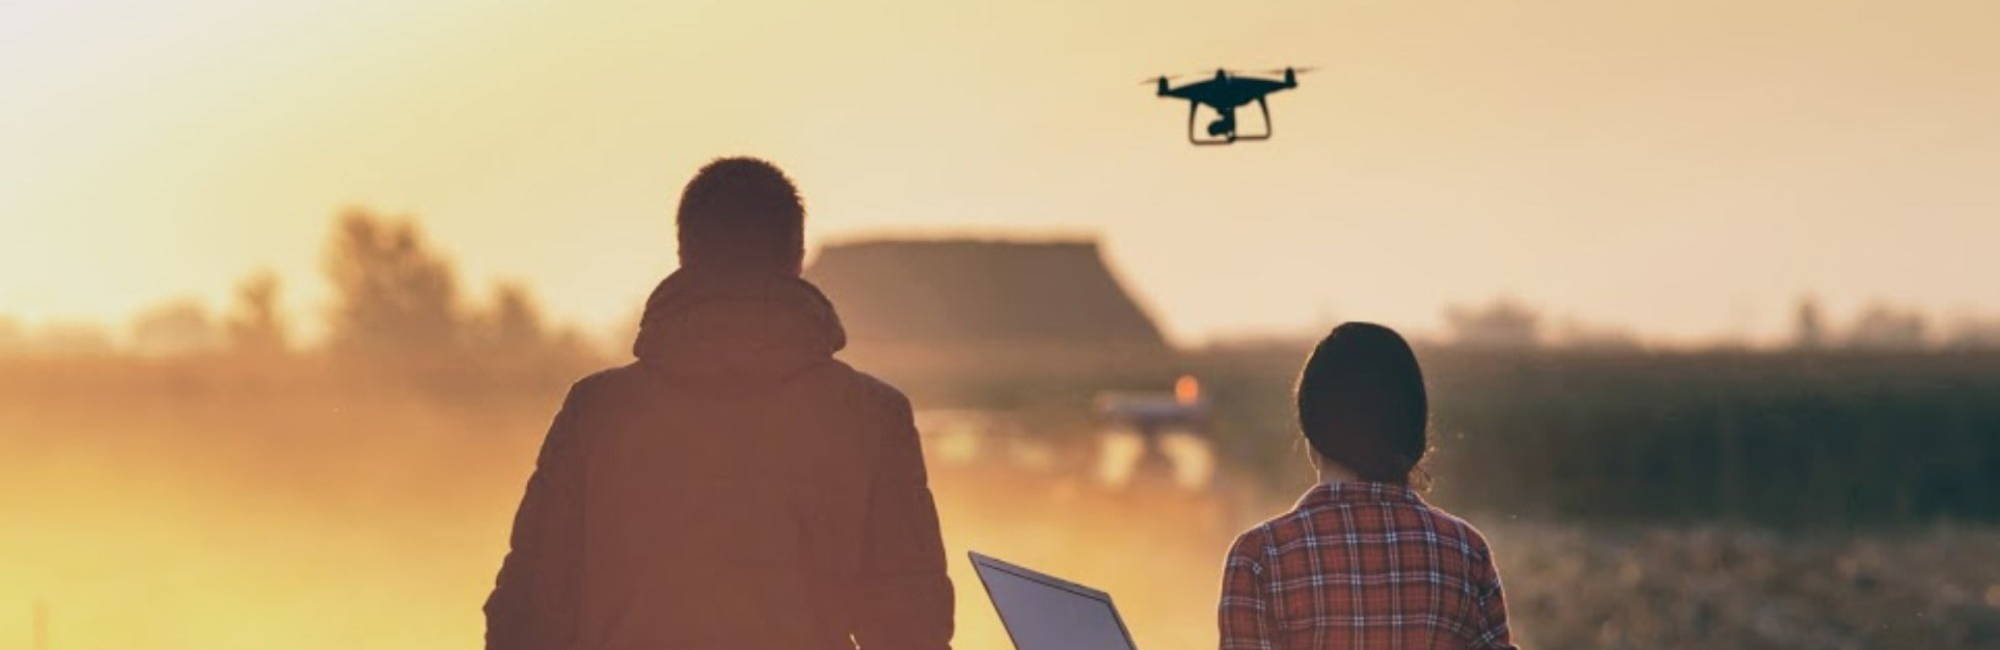 Woman and man farmer walking in field with a drone